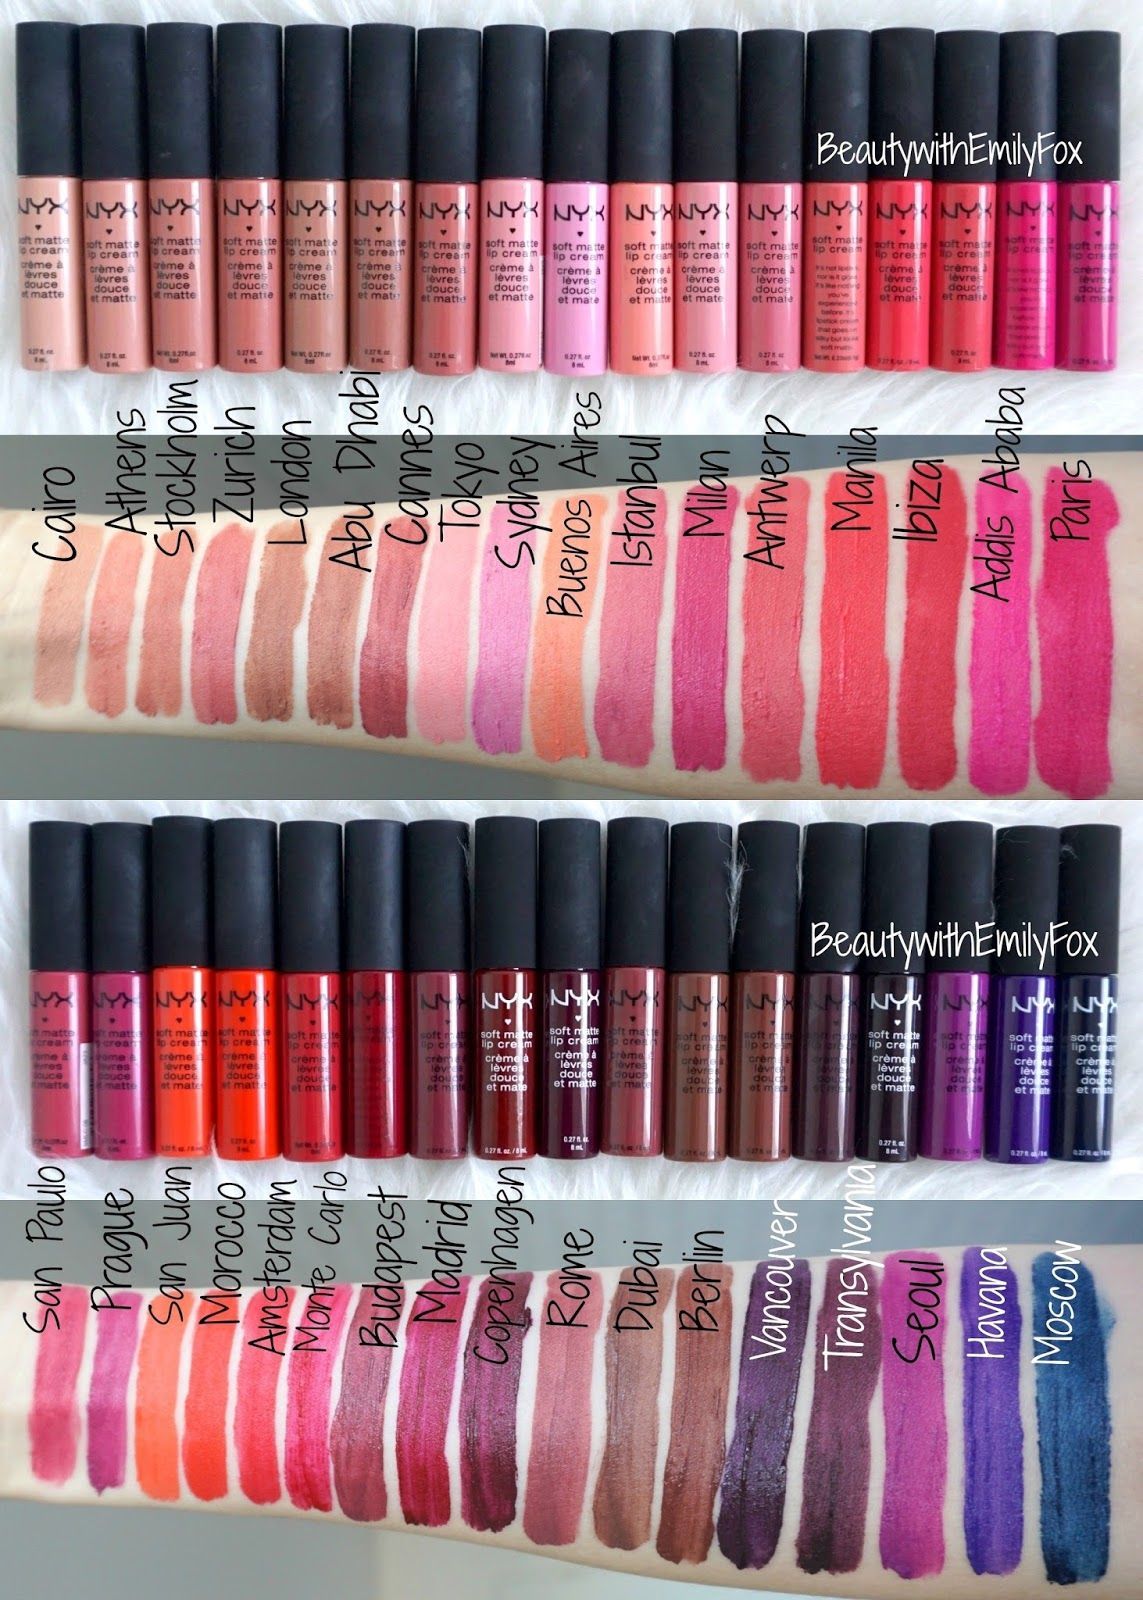 All 34 shades of the NYX Soft Matte Lip Cream – Swatches: Cairo, Athens, Stockholm